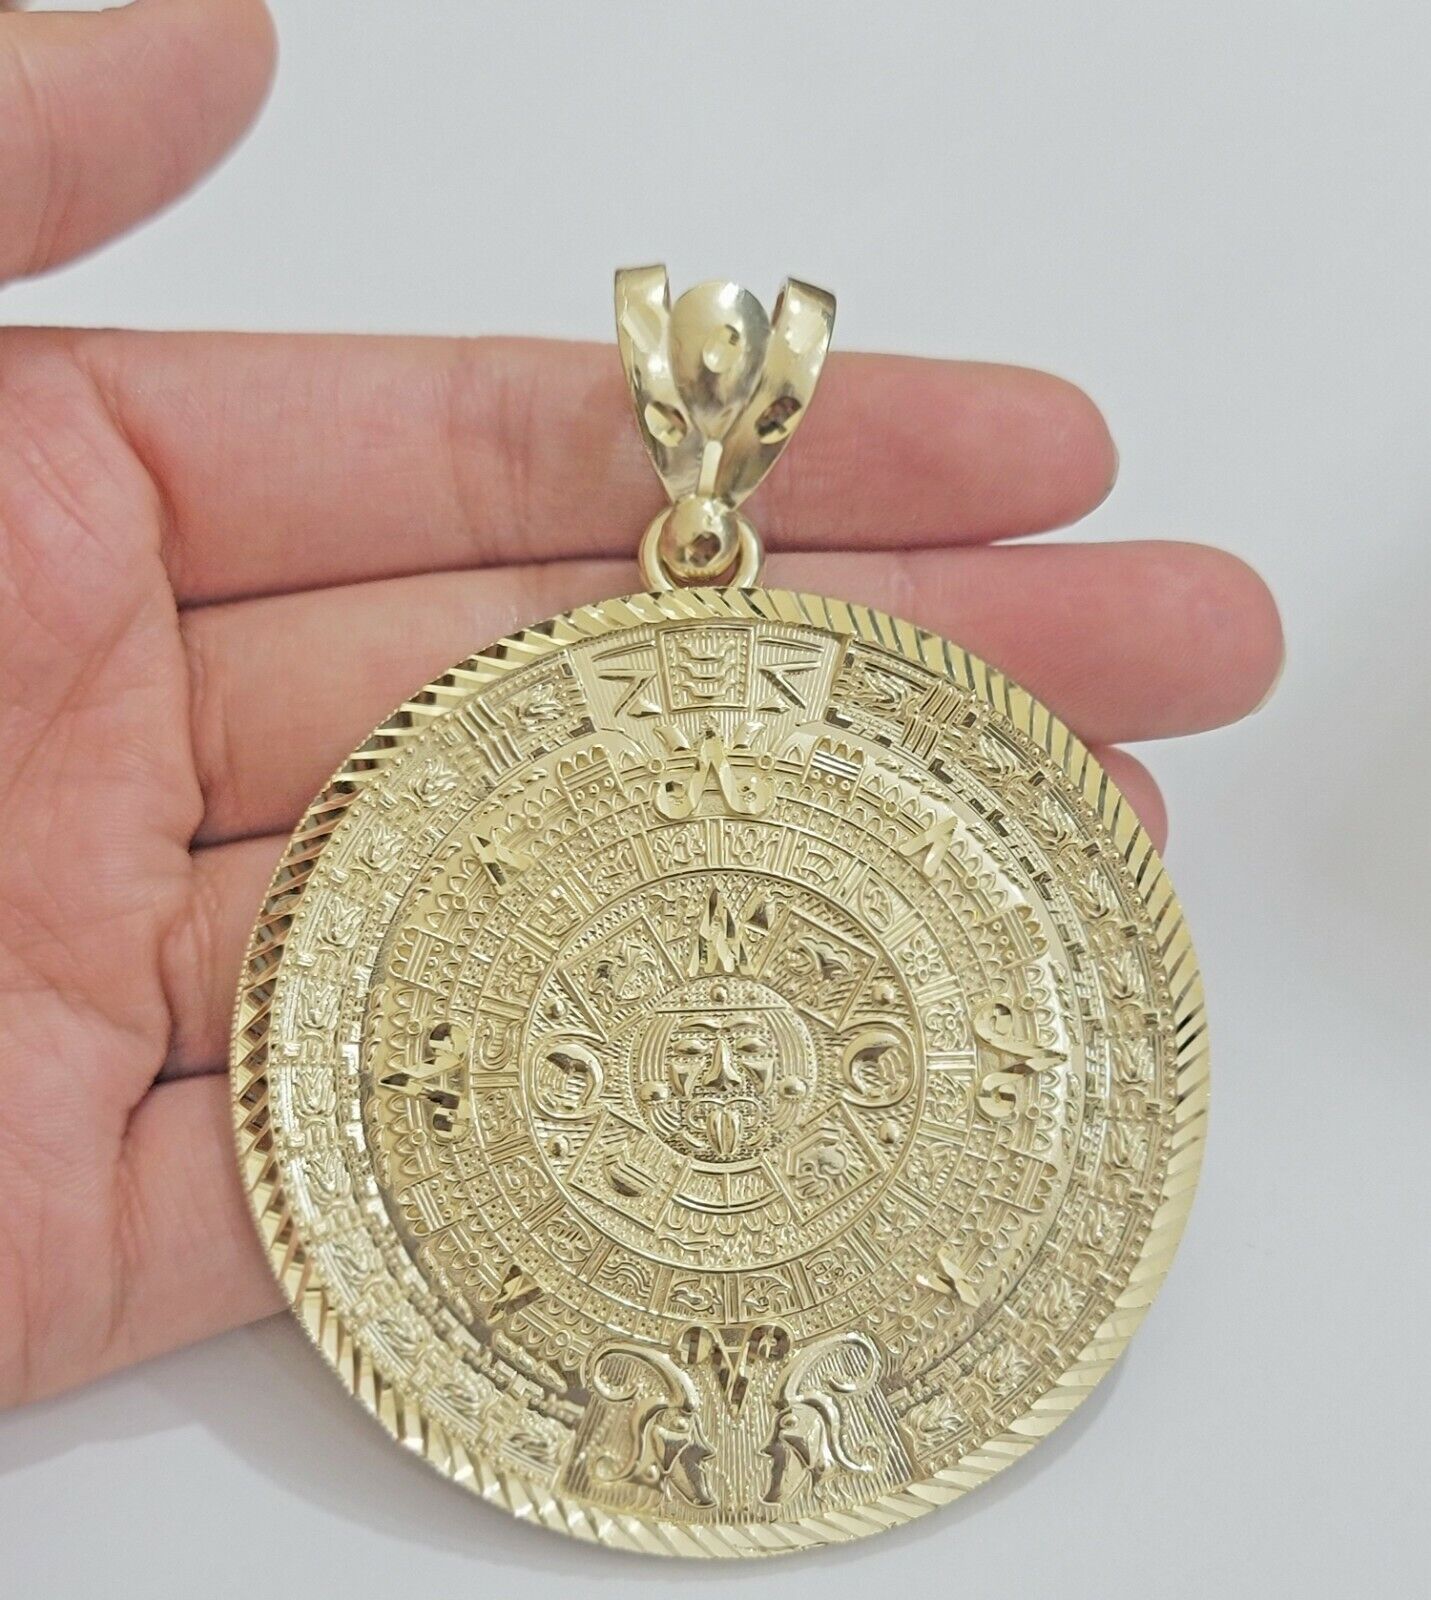 SOLID Real 14kt Yellow Gold Pendant Aztec Mayan Calendar 2.5" Men's Round Charm